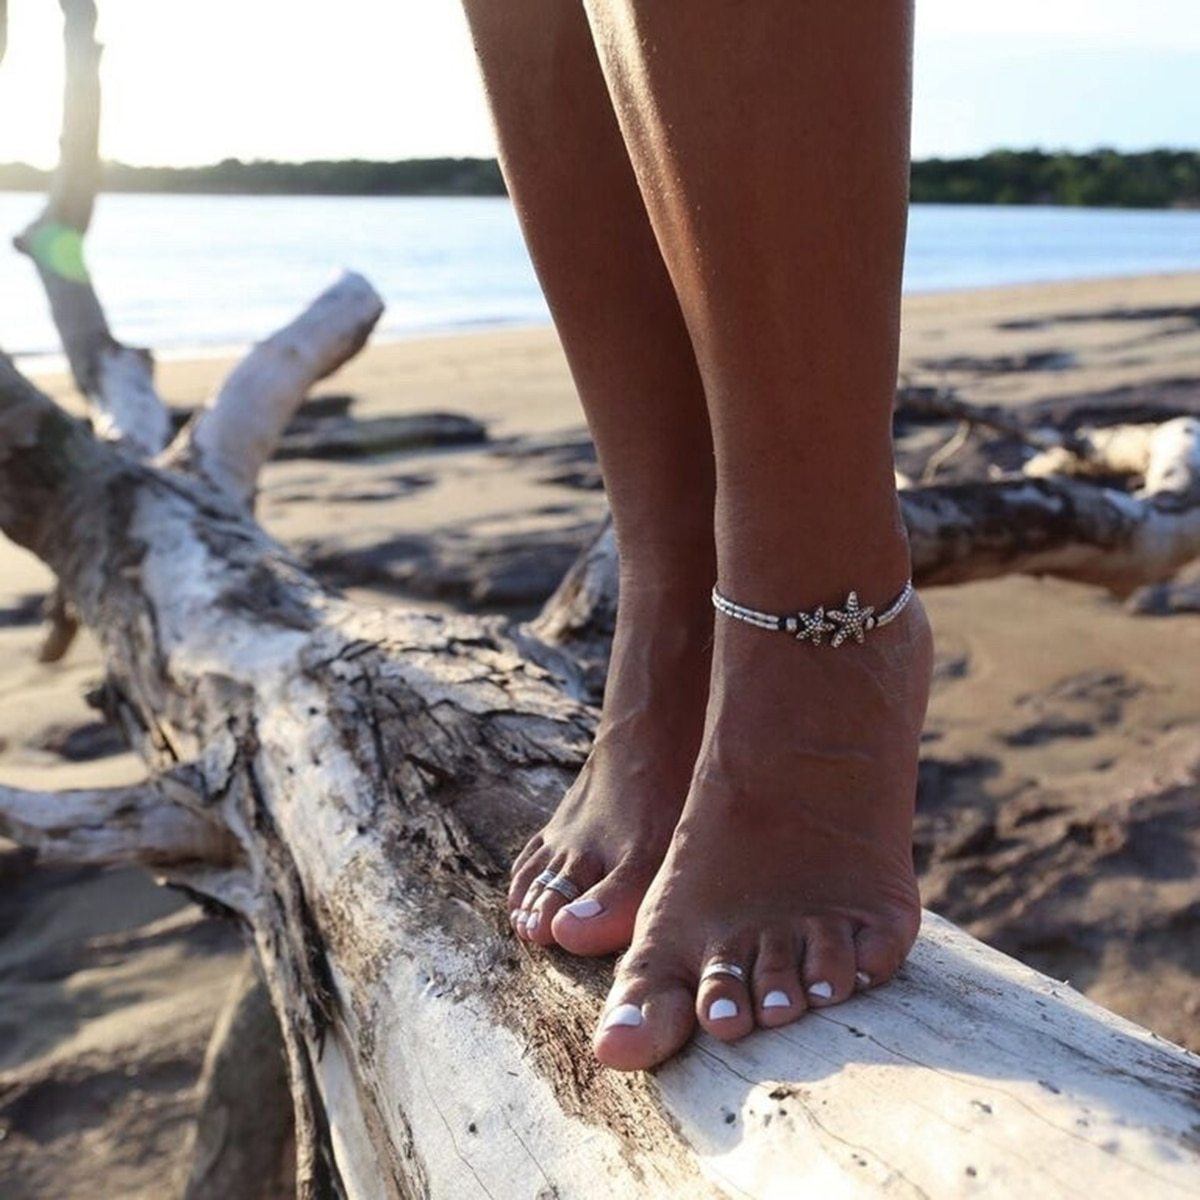 SUMMER STYLE! Vintage Shell,Beads ,Turquoise Anklets